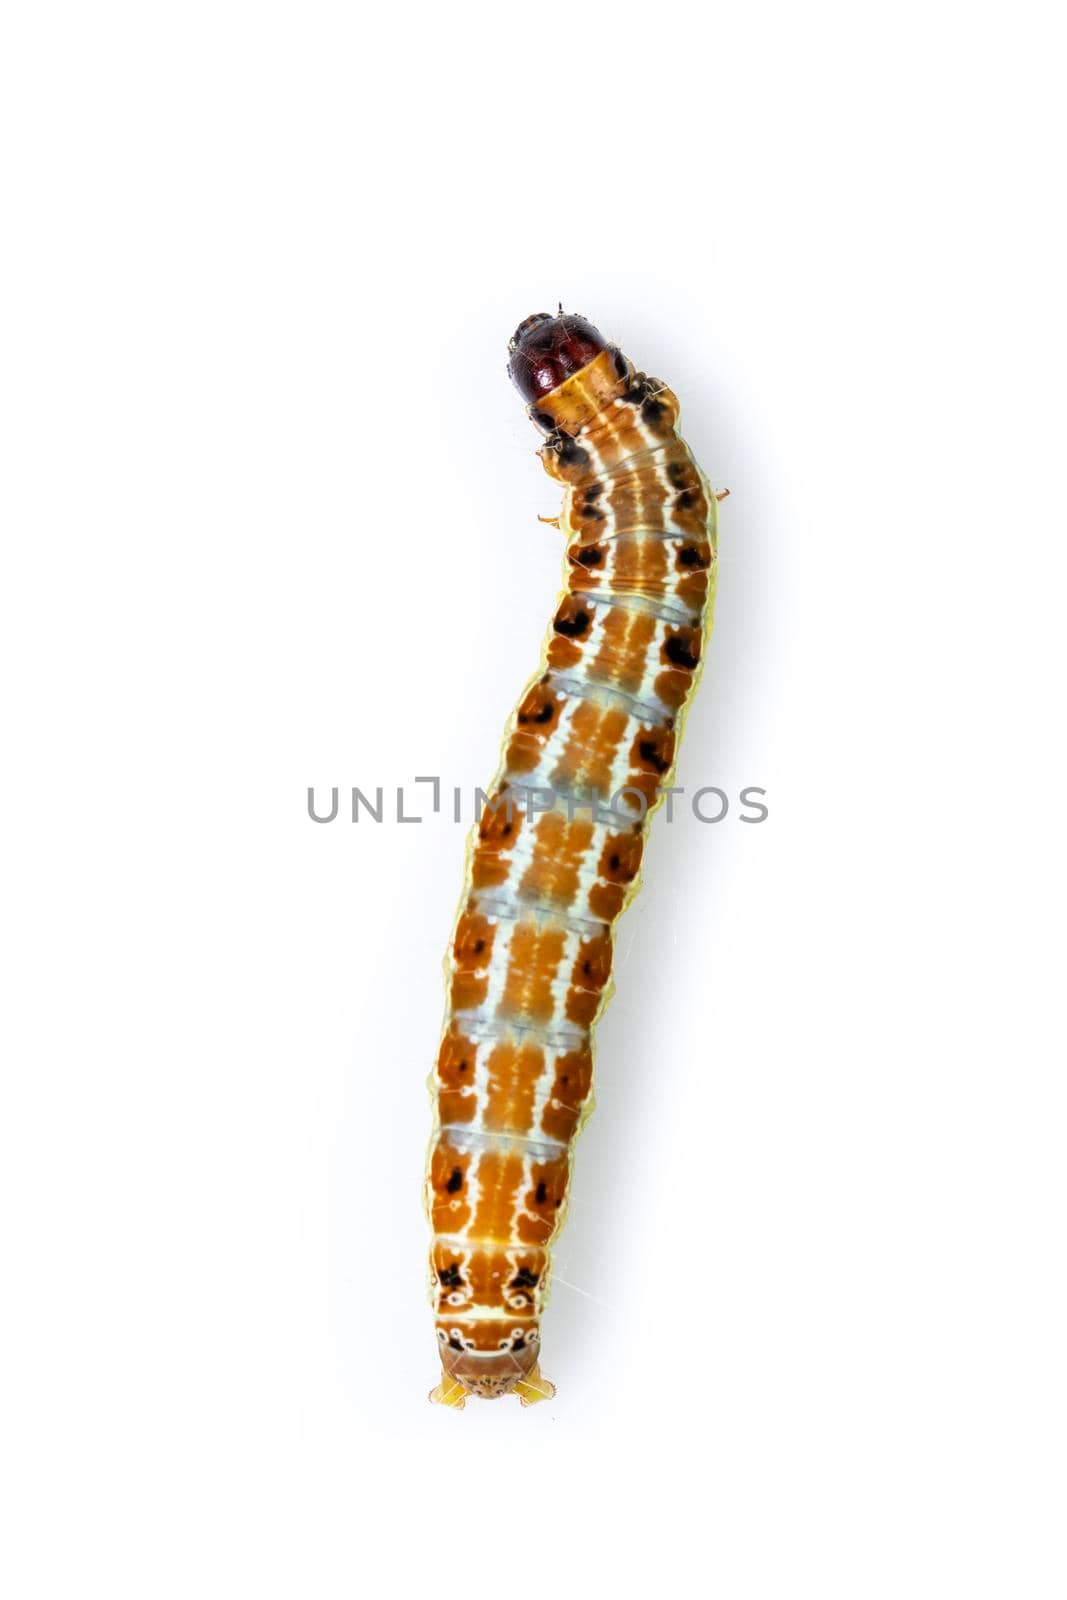 Image of brown pattern caterpillars isolated on white background. Animal. Insect. by yod67